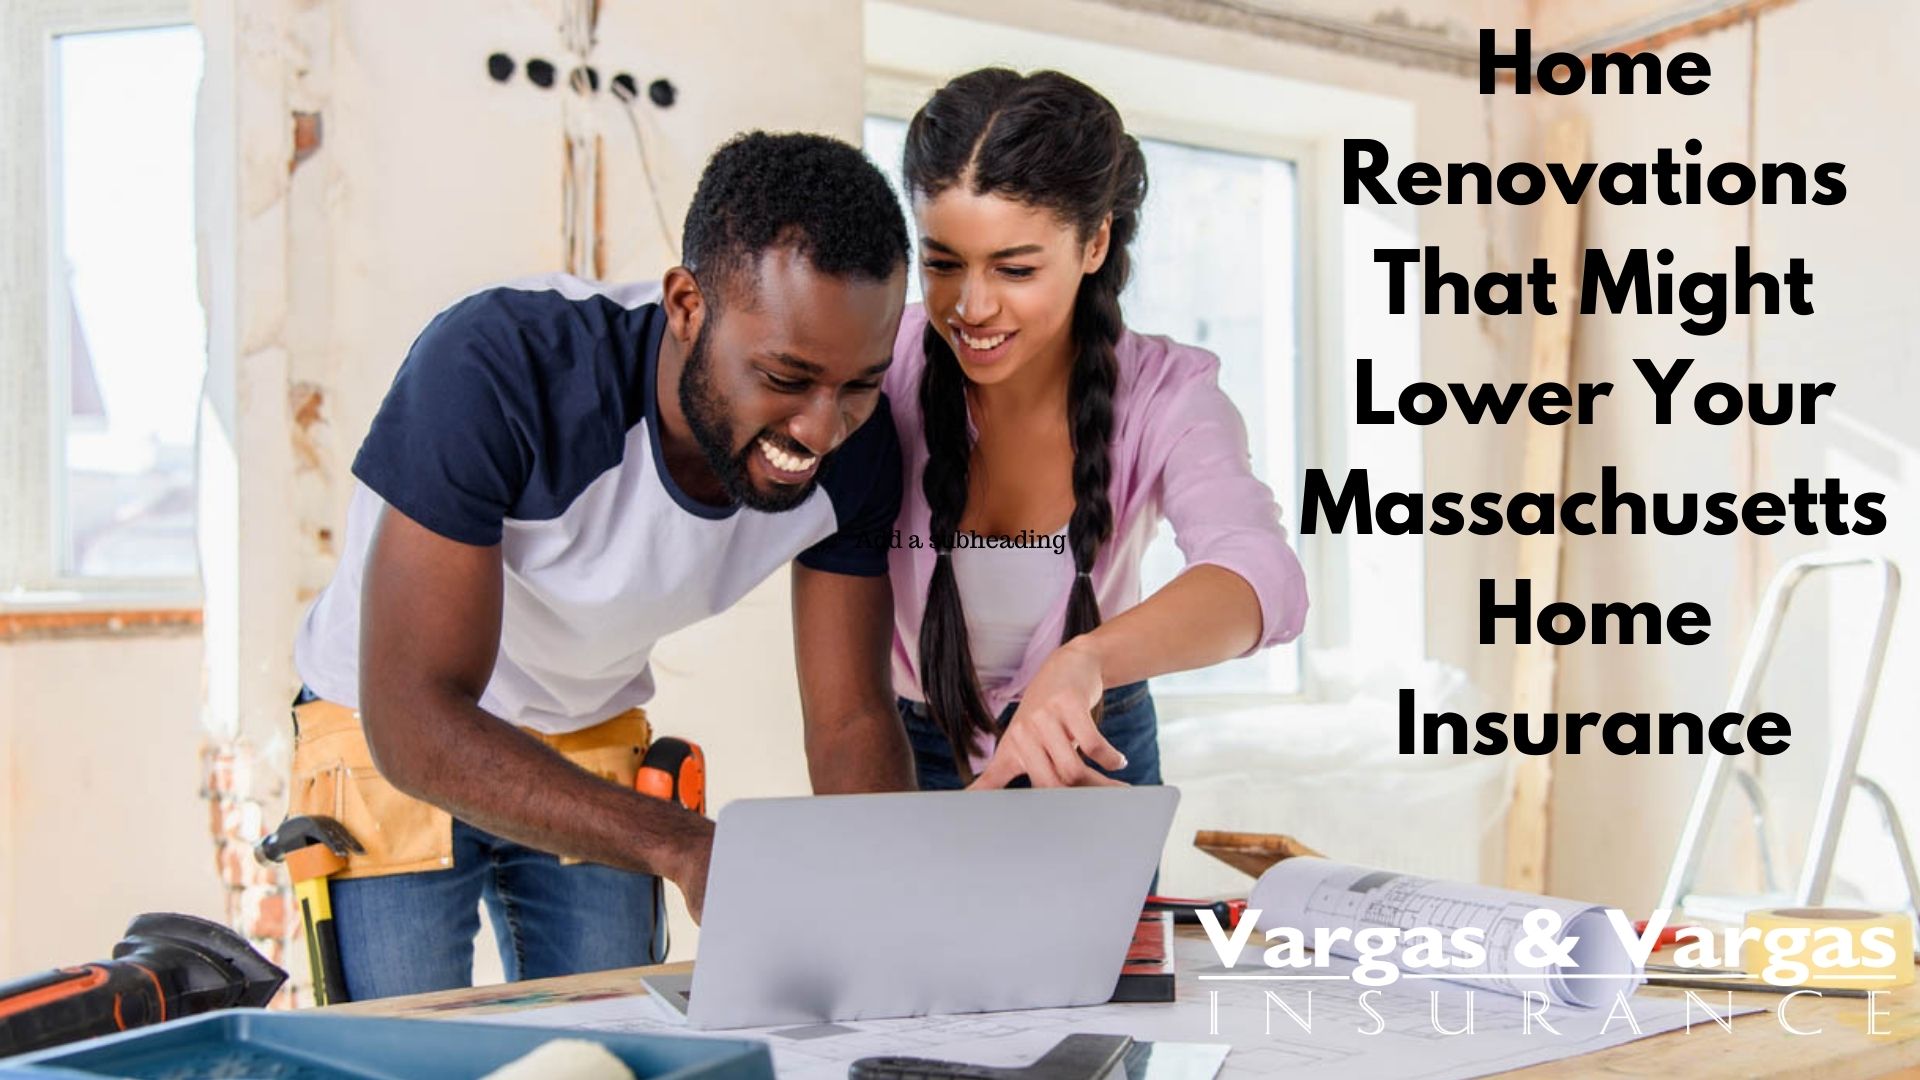 Home Renovations That Might Lower Your Massachusetts Home Insurance